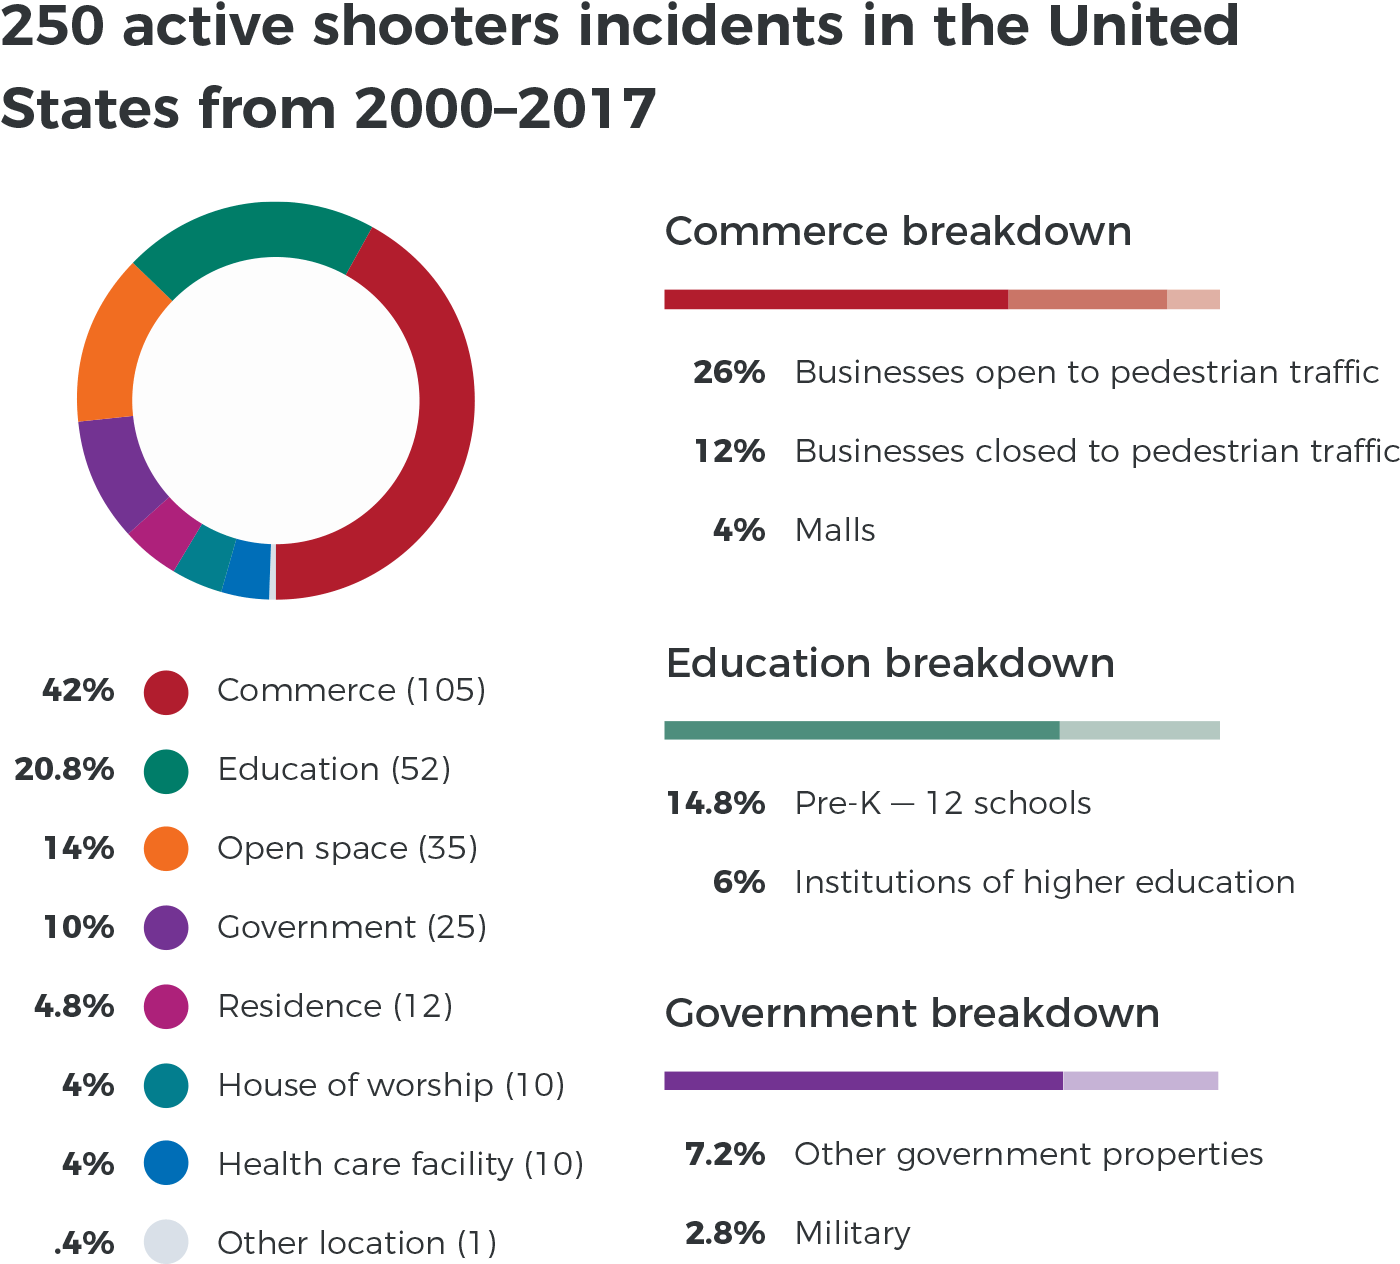 Statistics of 250 active shooter incidents in the United States from 2000-2017